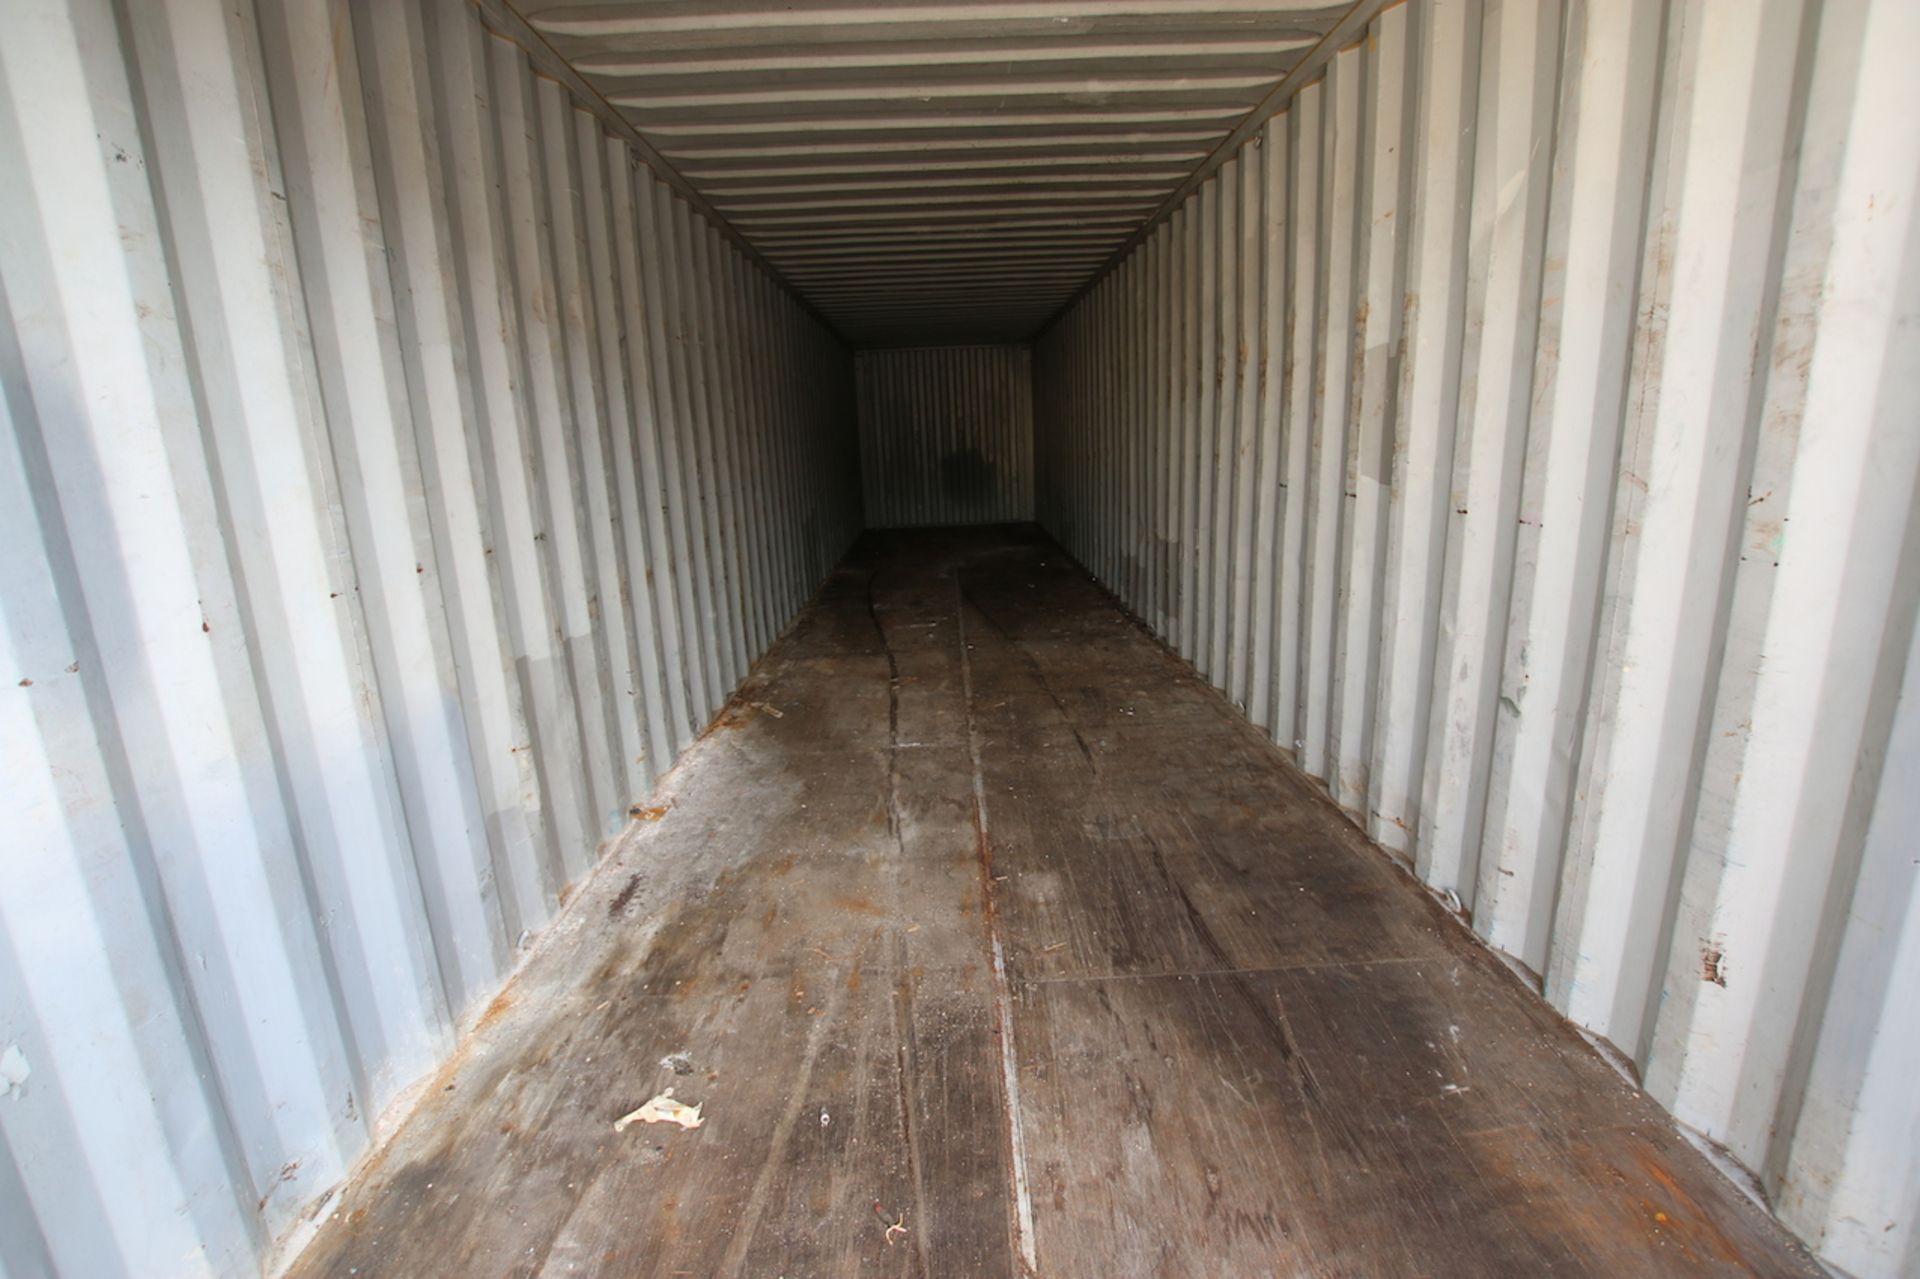 International Cargo Shipping Container, Dims.: 38'5" L x 8' W x 7'10" H - Image 3 of 5